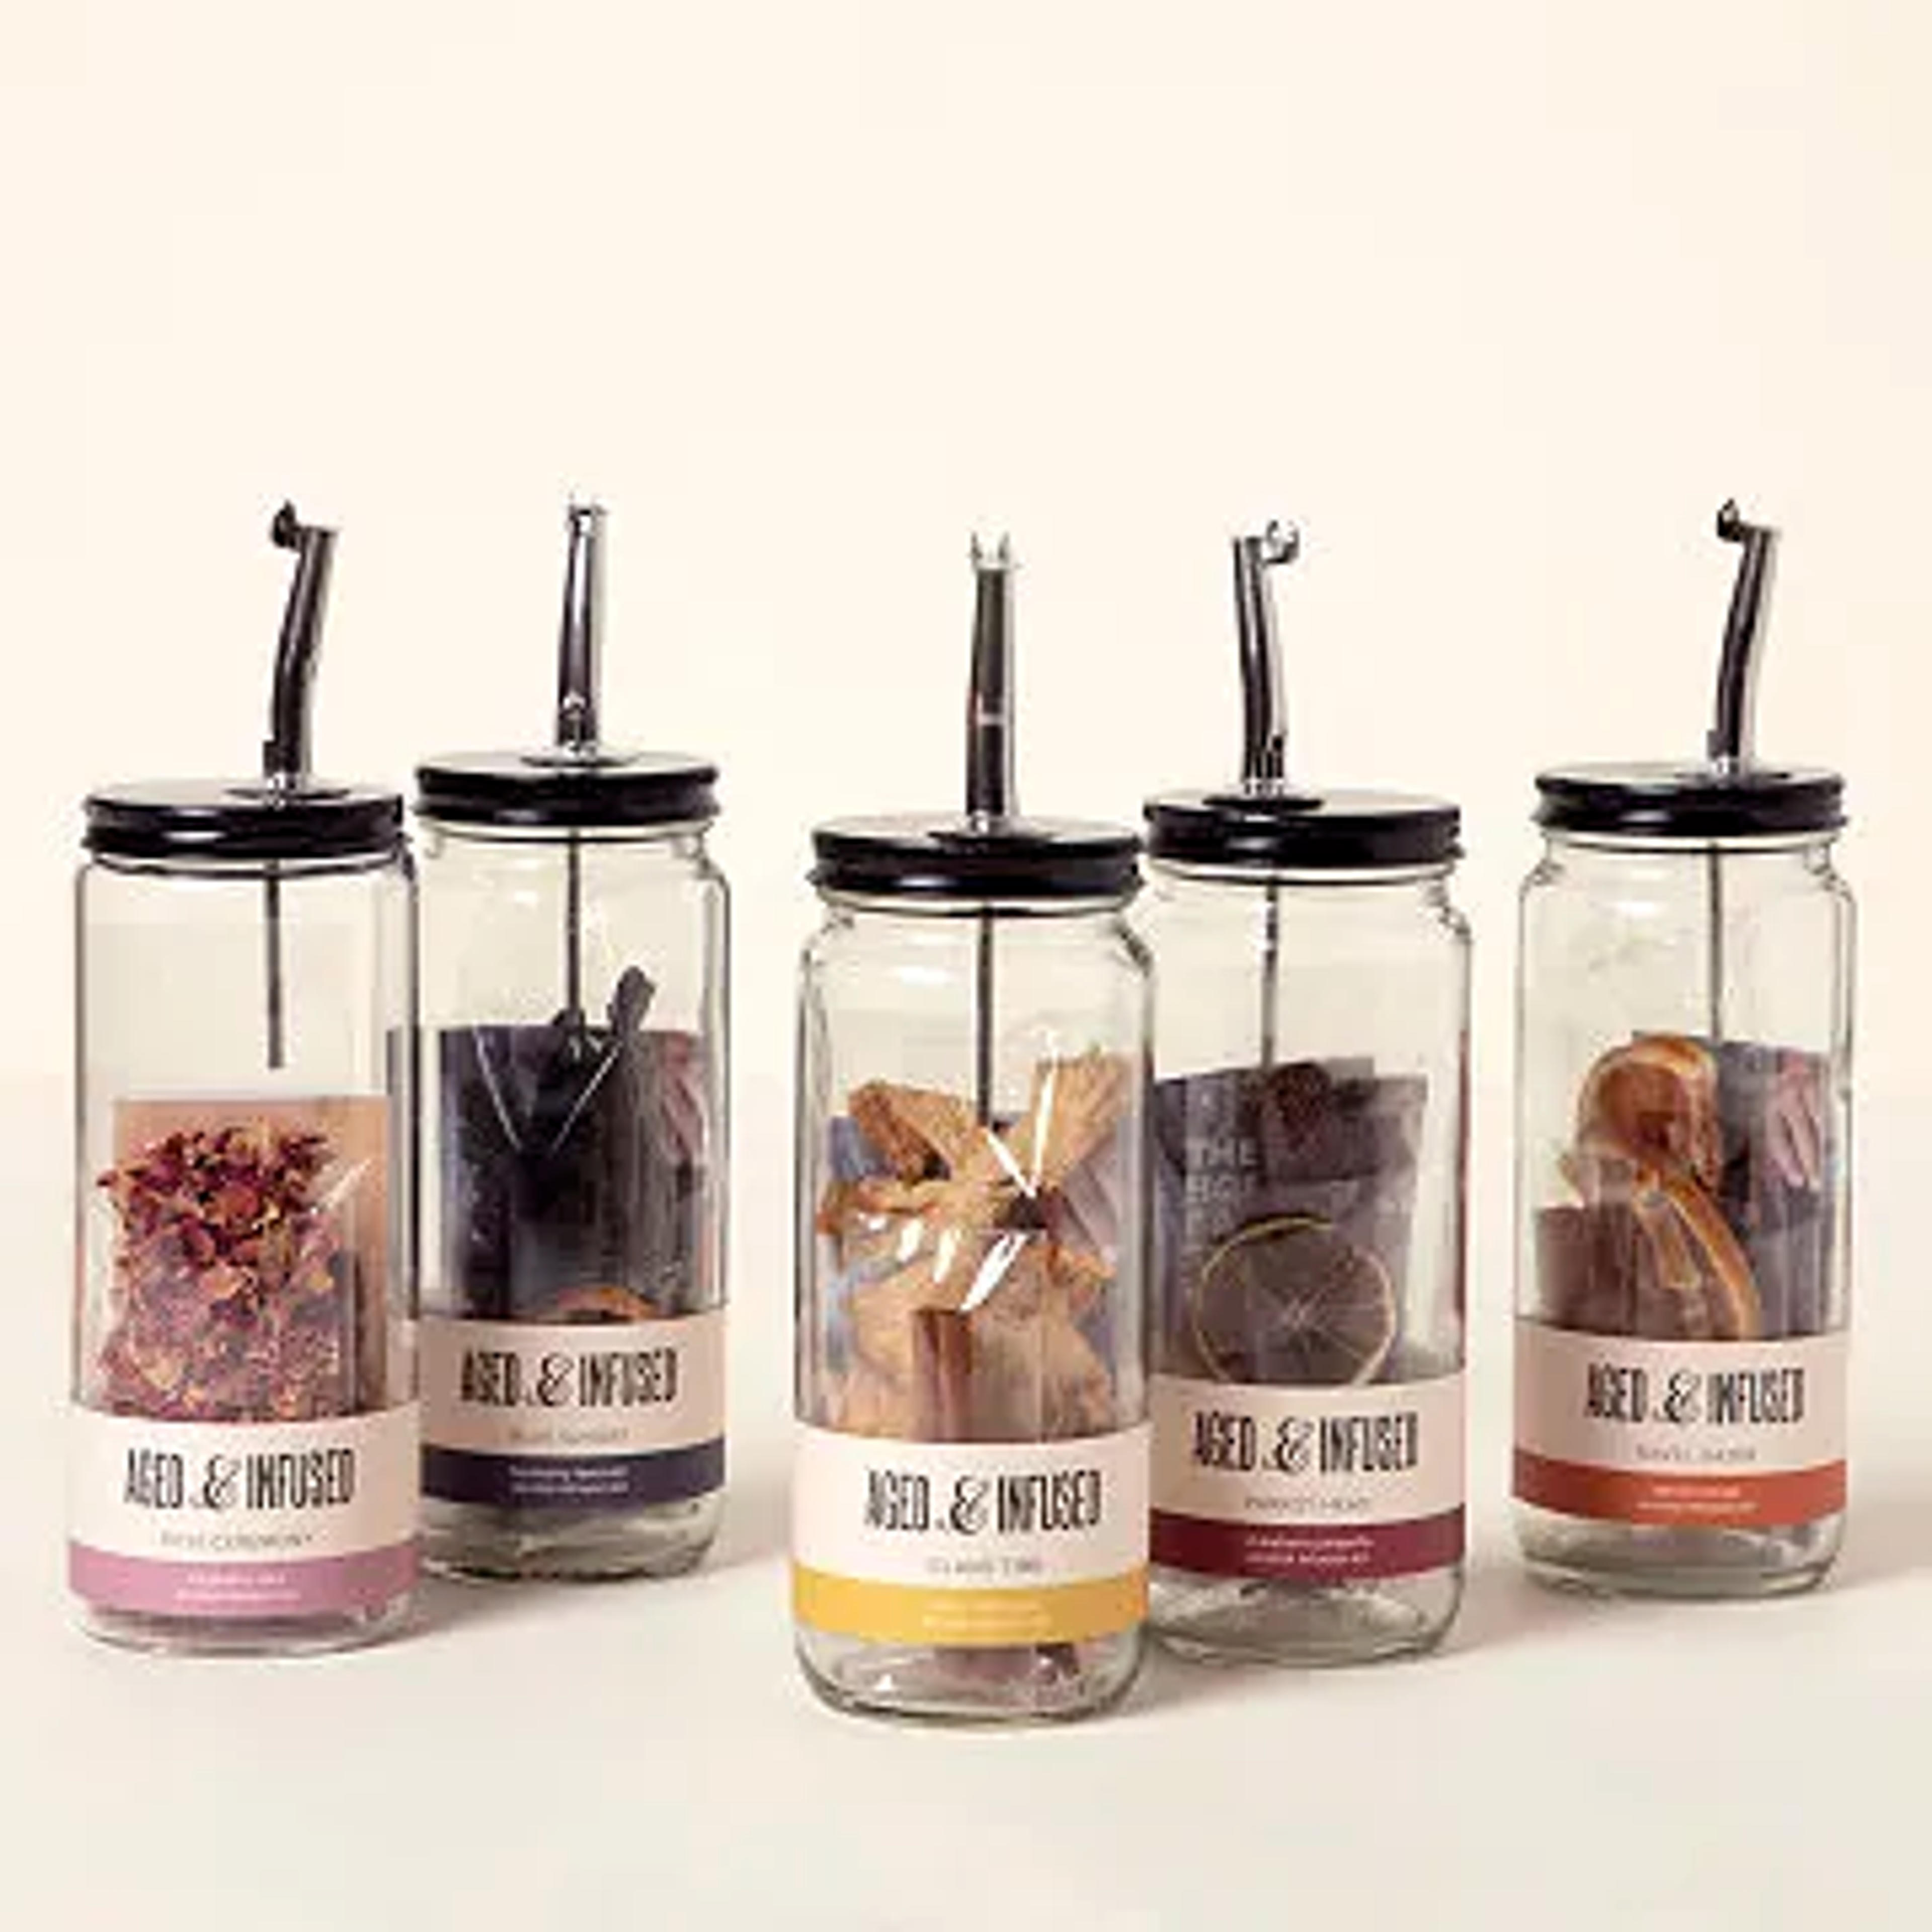 uncommongoods.com/product/infuse-pour-alcohol-kit